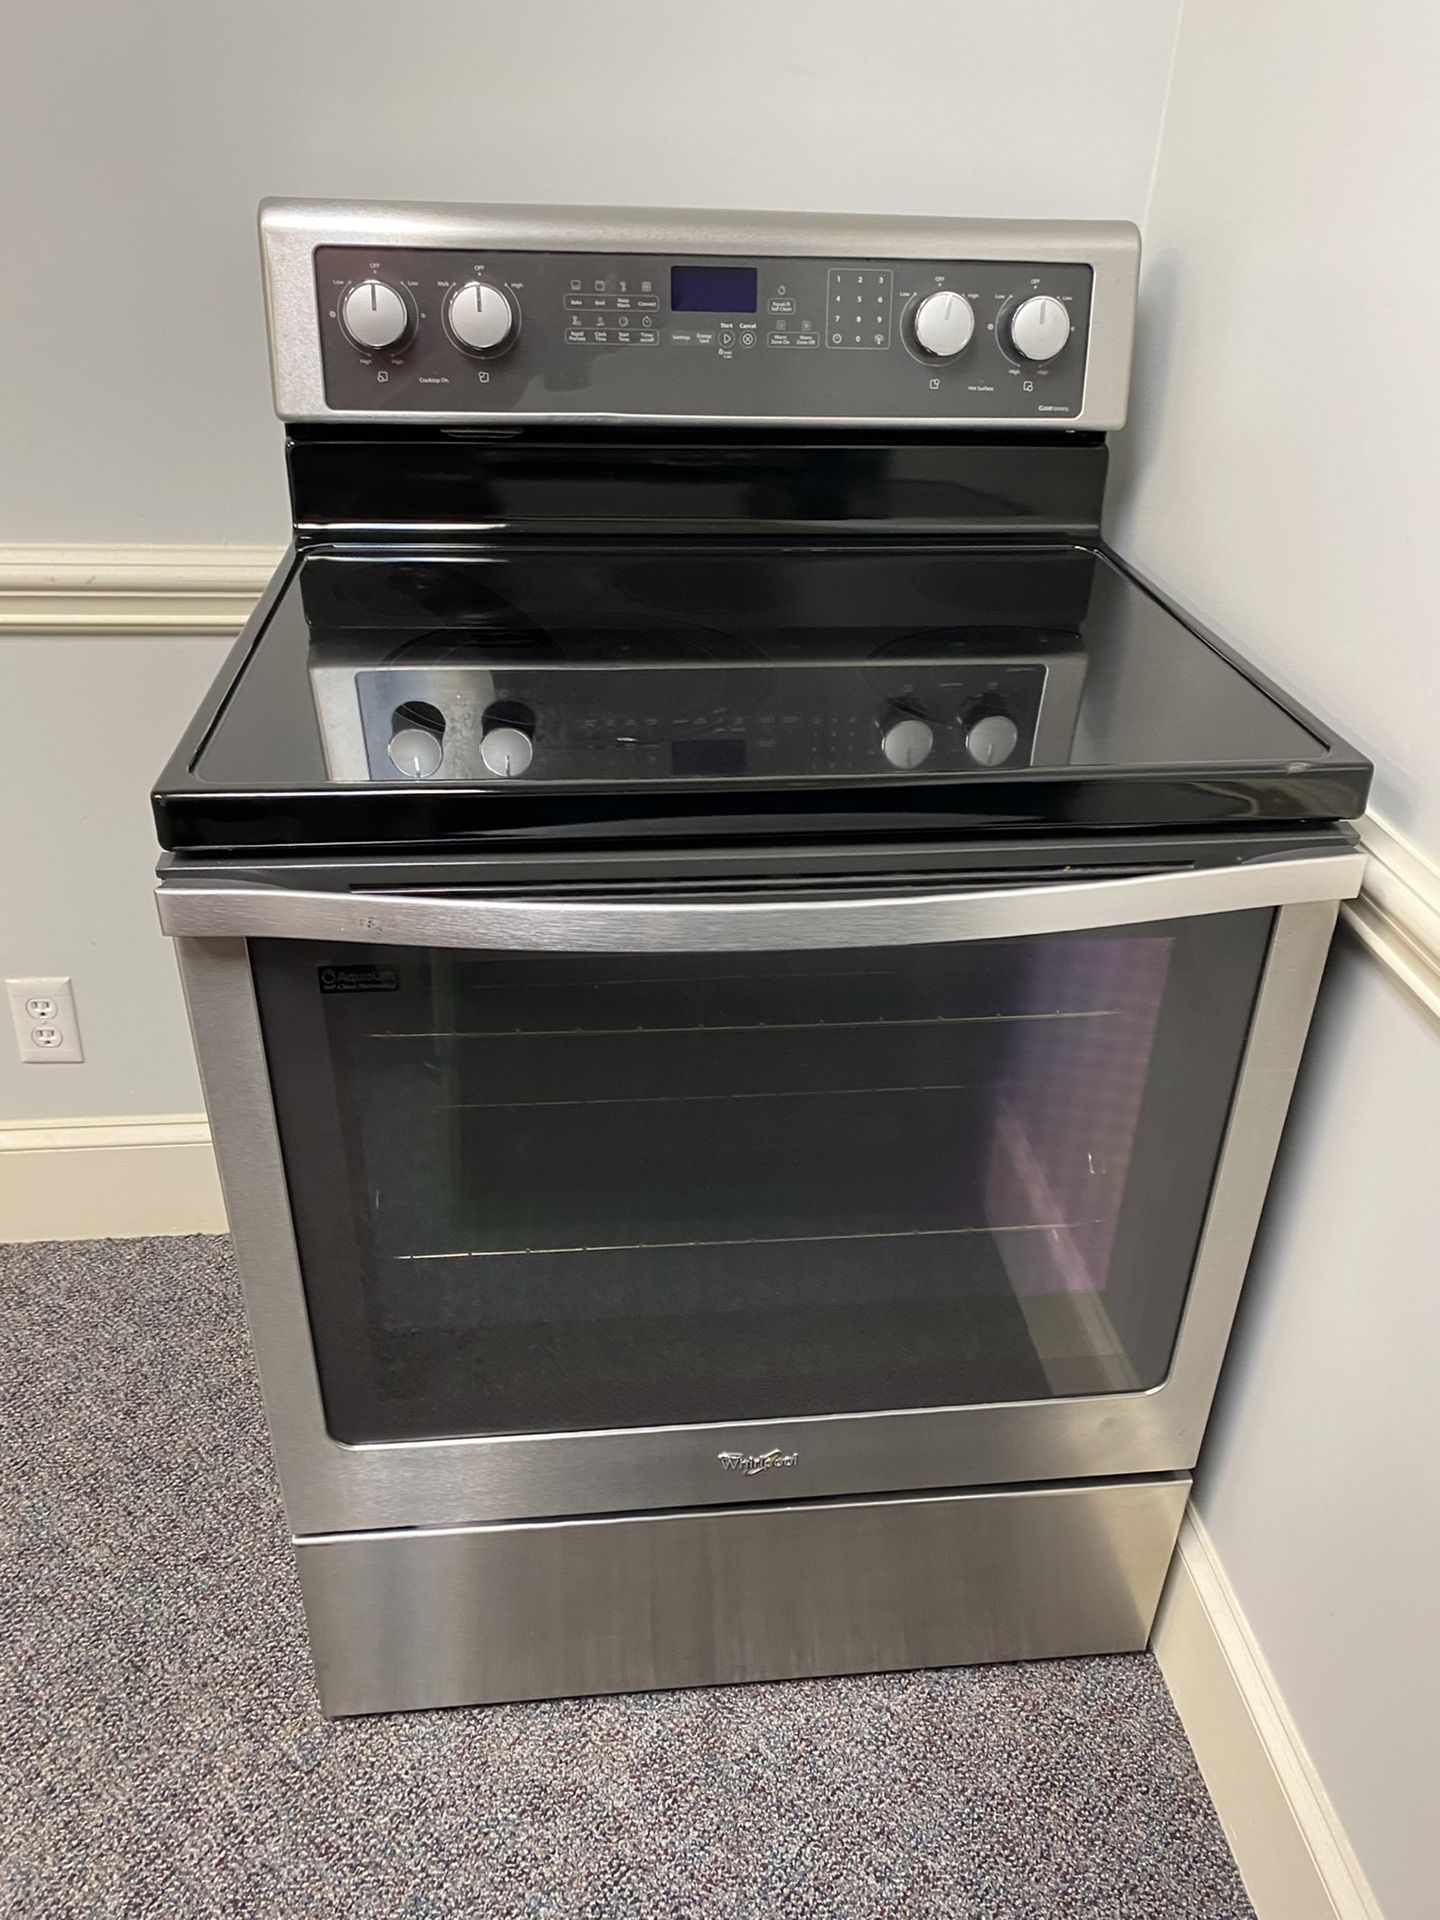 WHIRLPOOL STAINLESS GLASS TOP STOVE WITH CONVECTION OVEN 4 MONTH WARRANTY